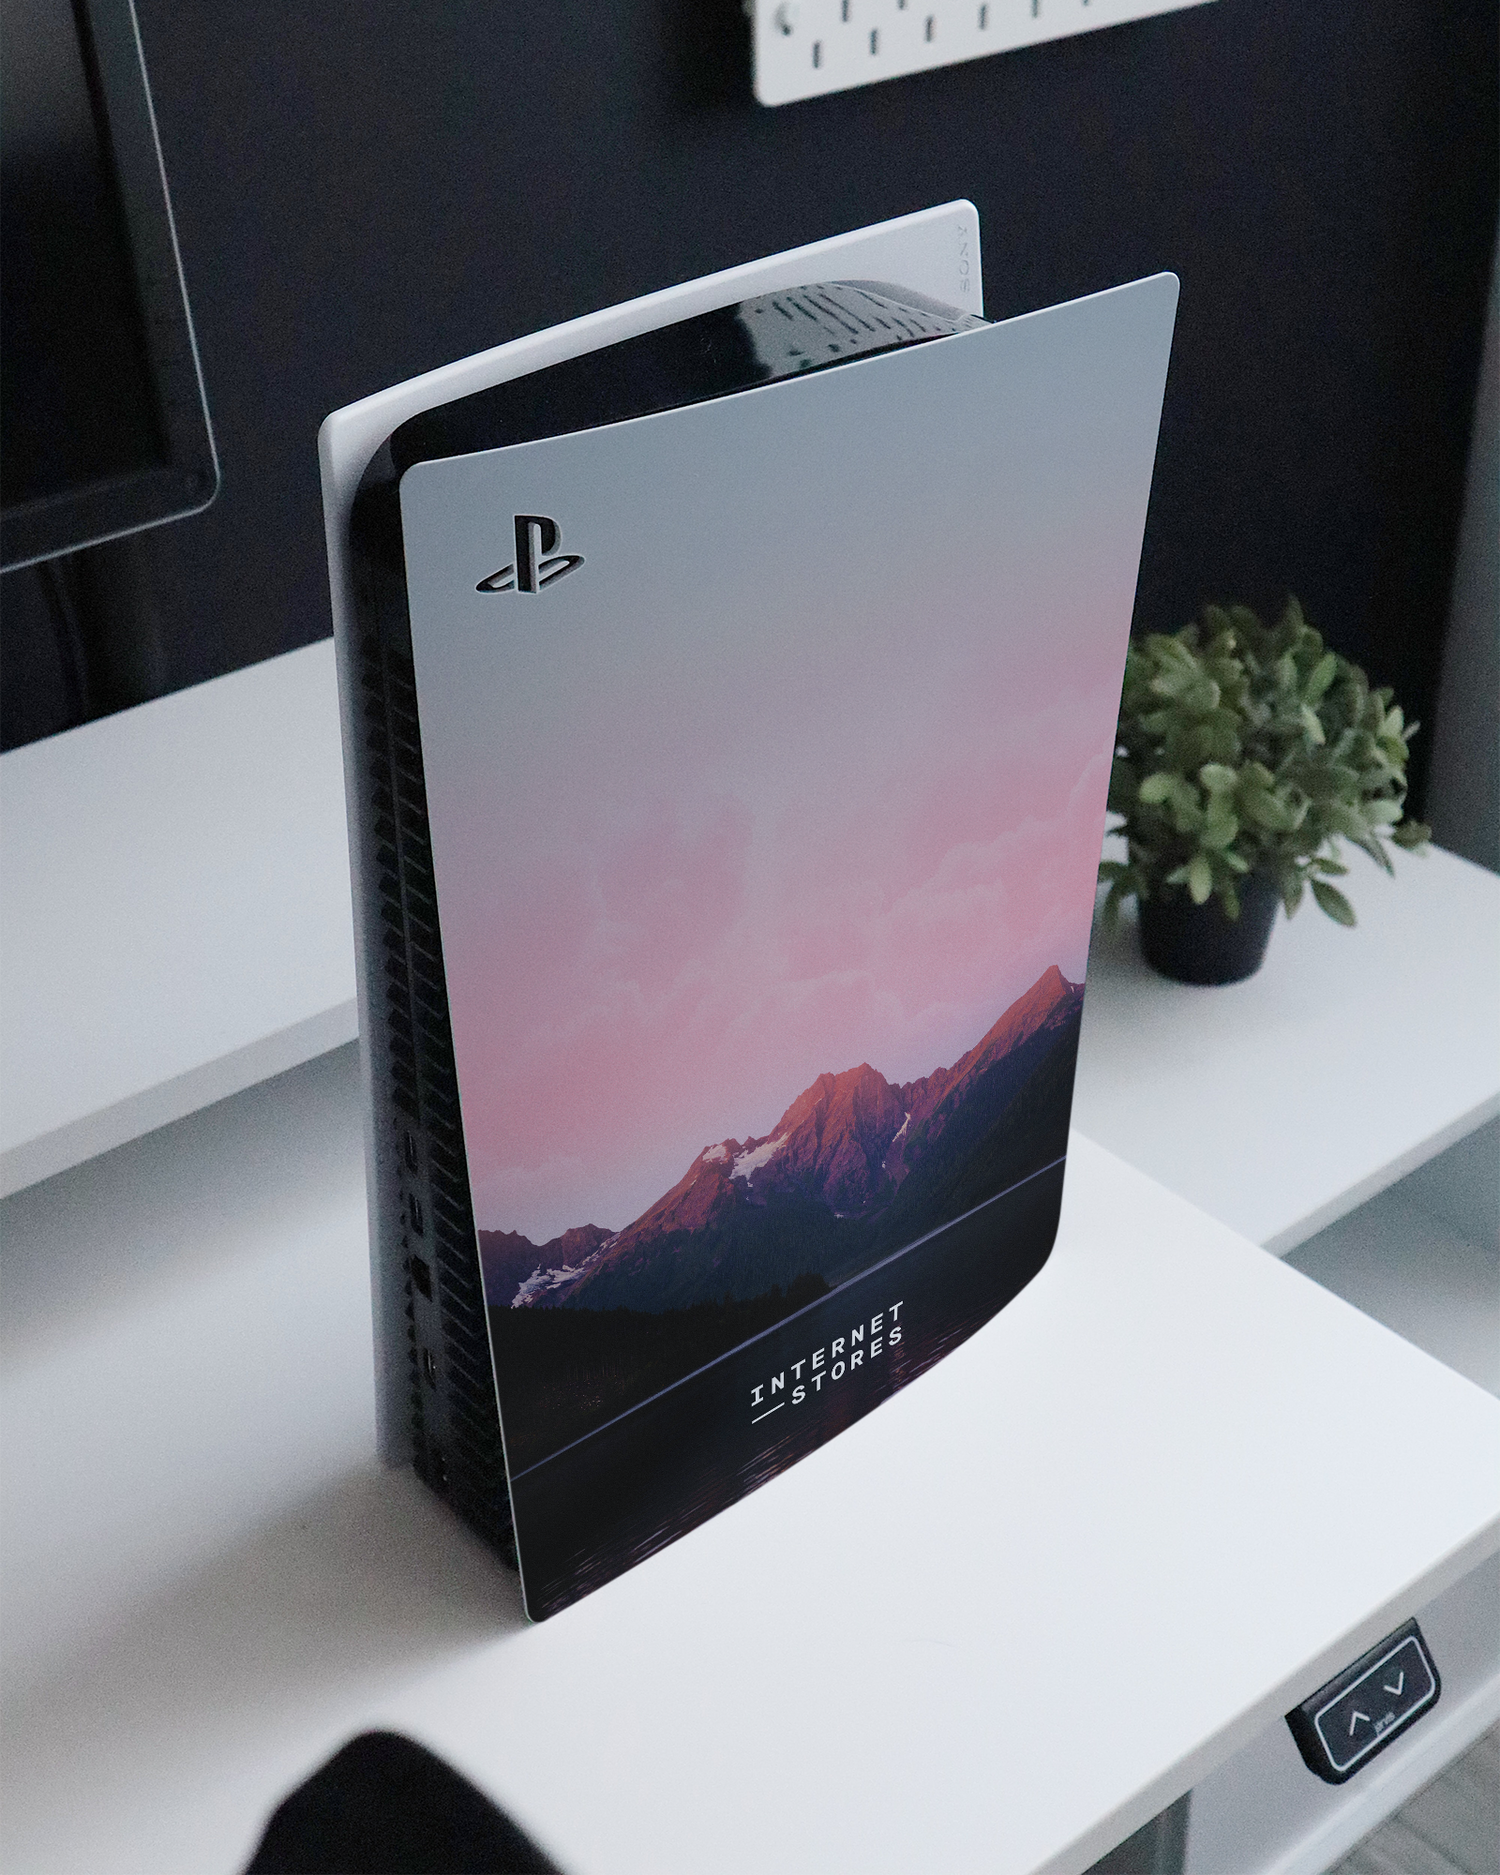 Lake Console Skin for Sony PlayStation 5 Digital Edition standing on a sideboard 